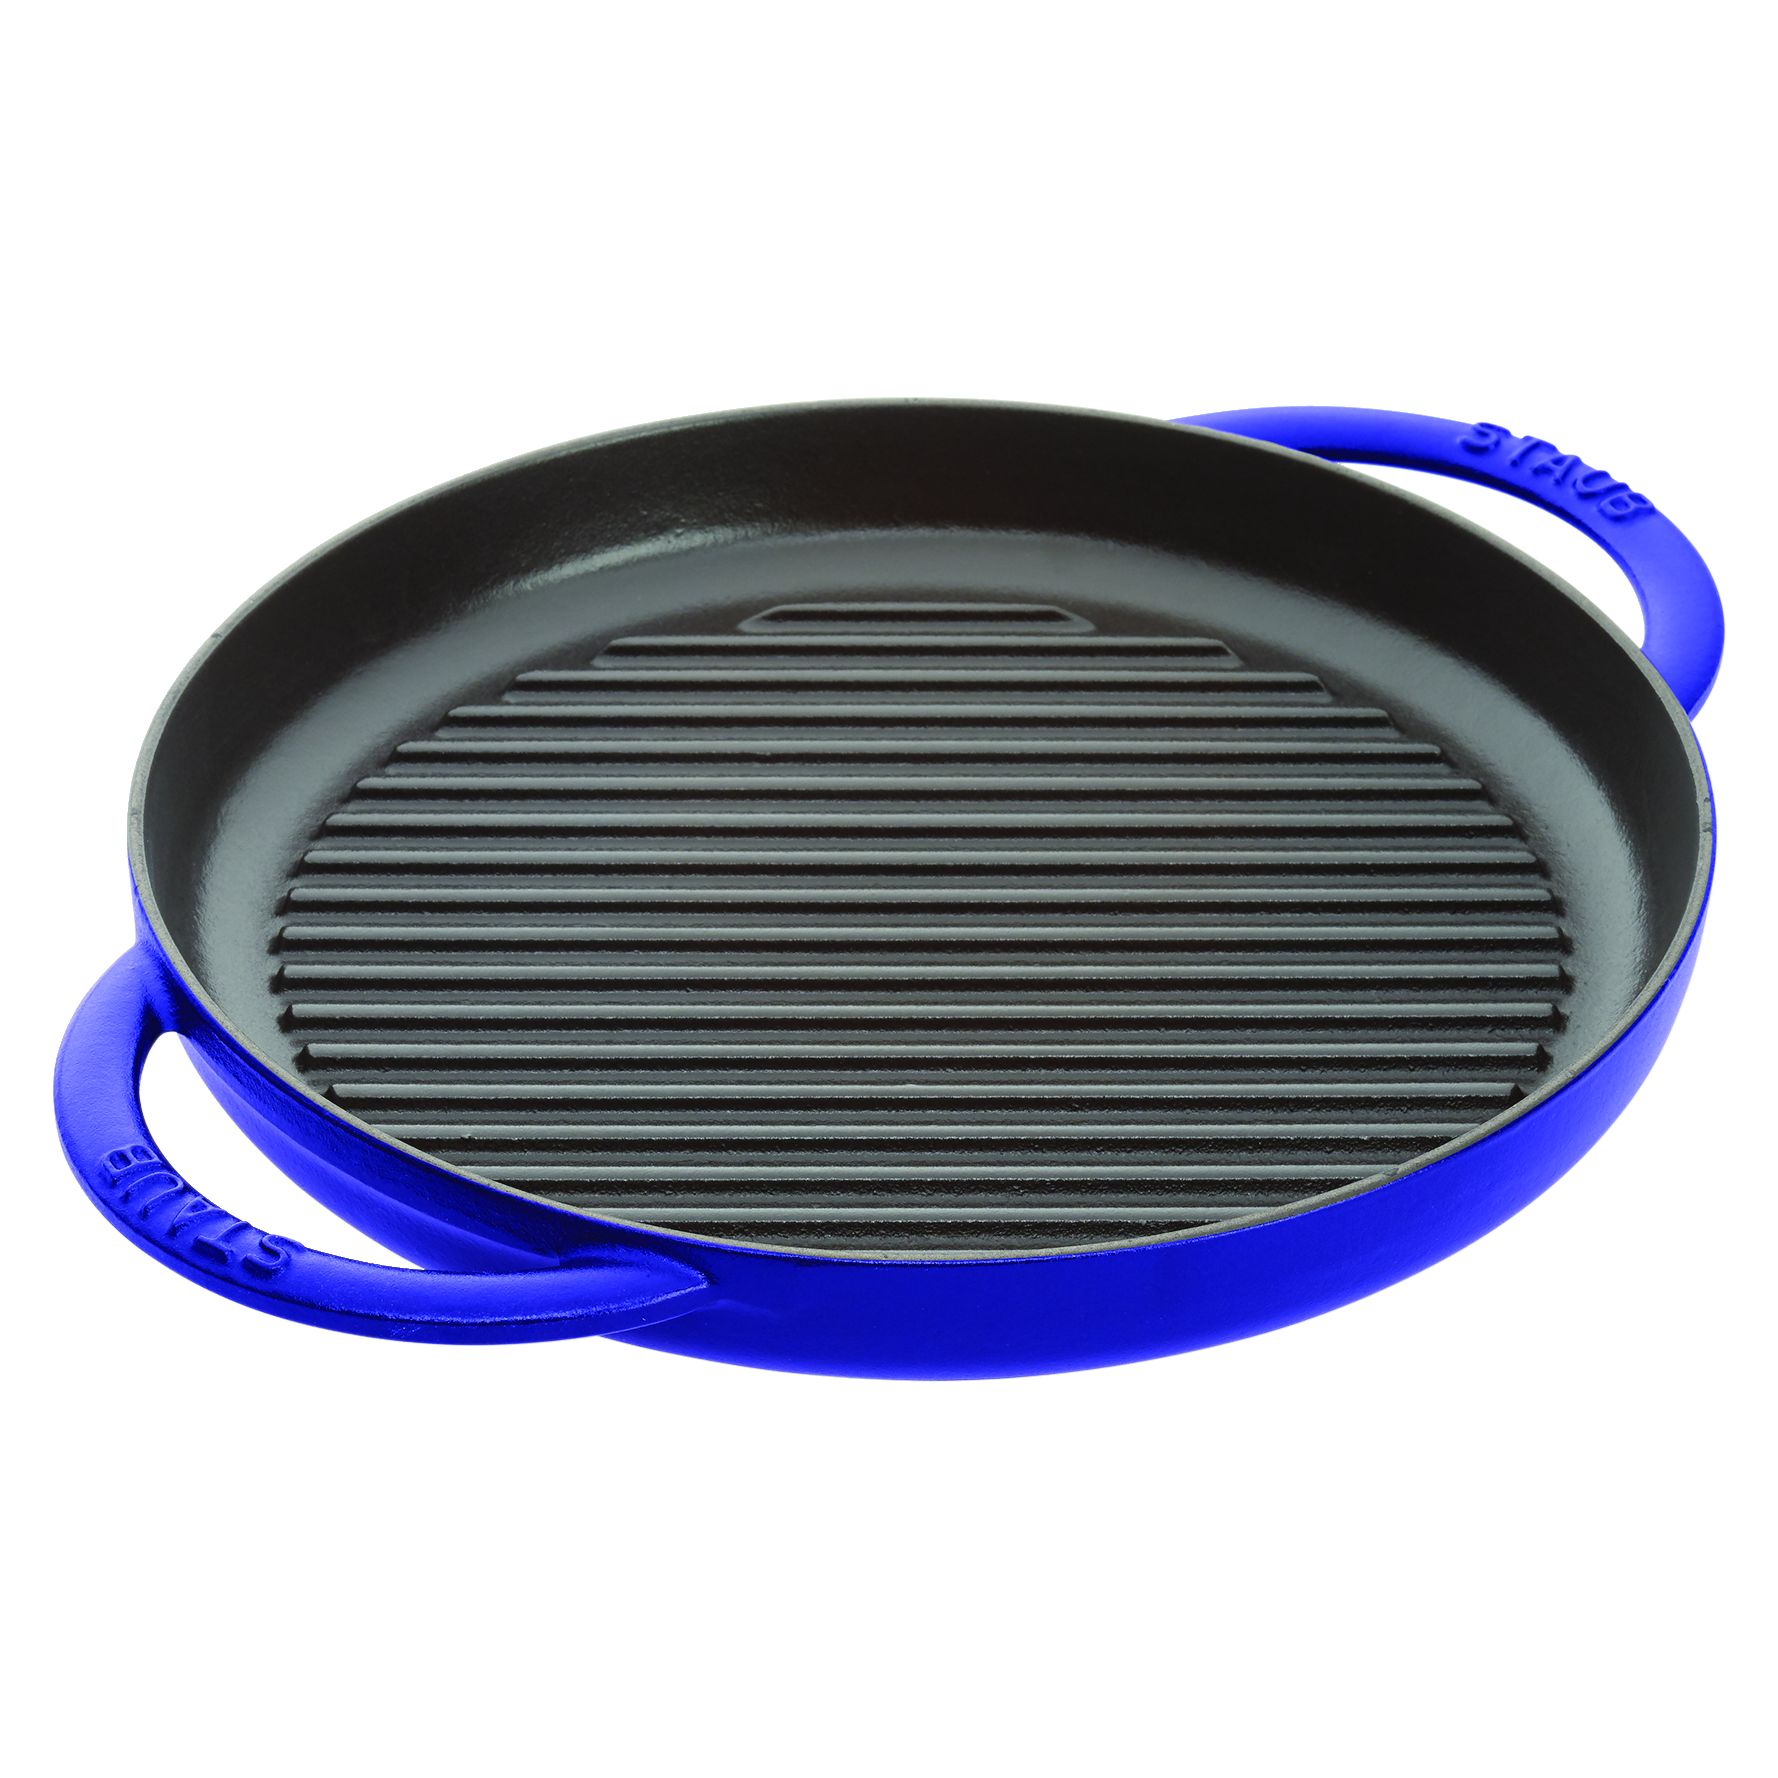 Staub Cast Iron - Grill Pans 10-inch, Round Double Handle Pure Grill,  graphite grey